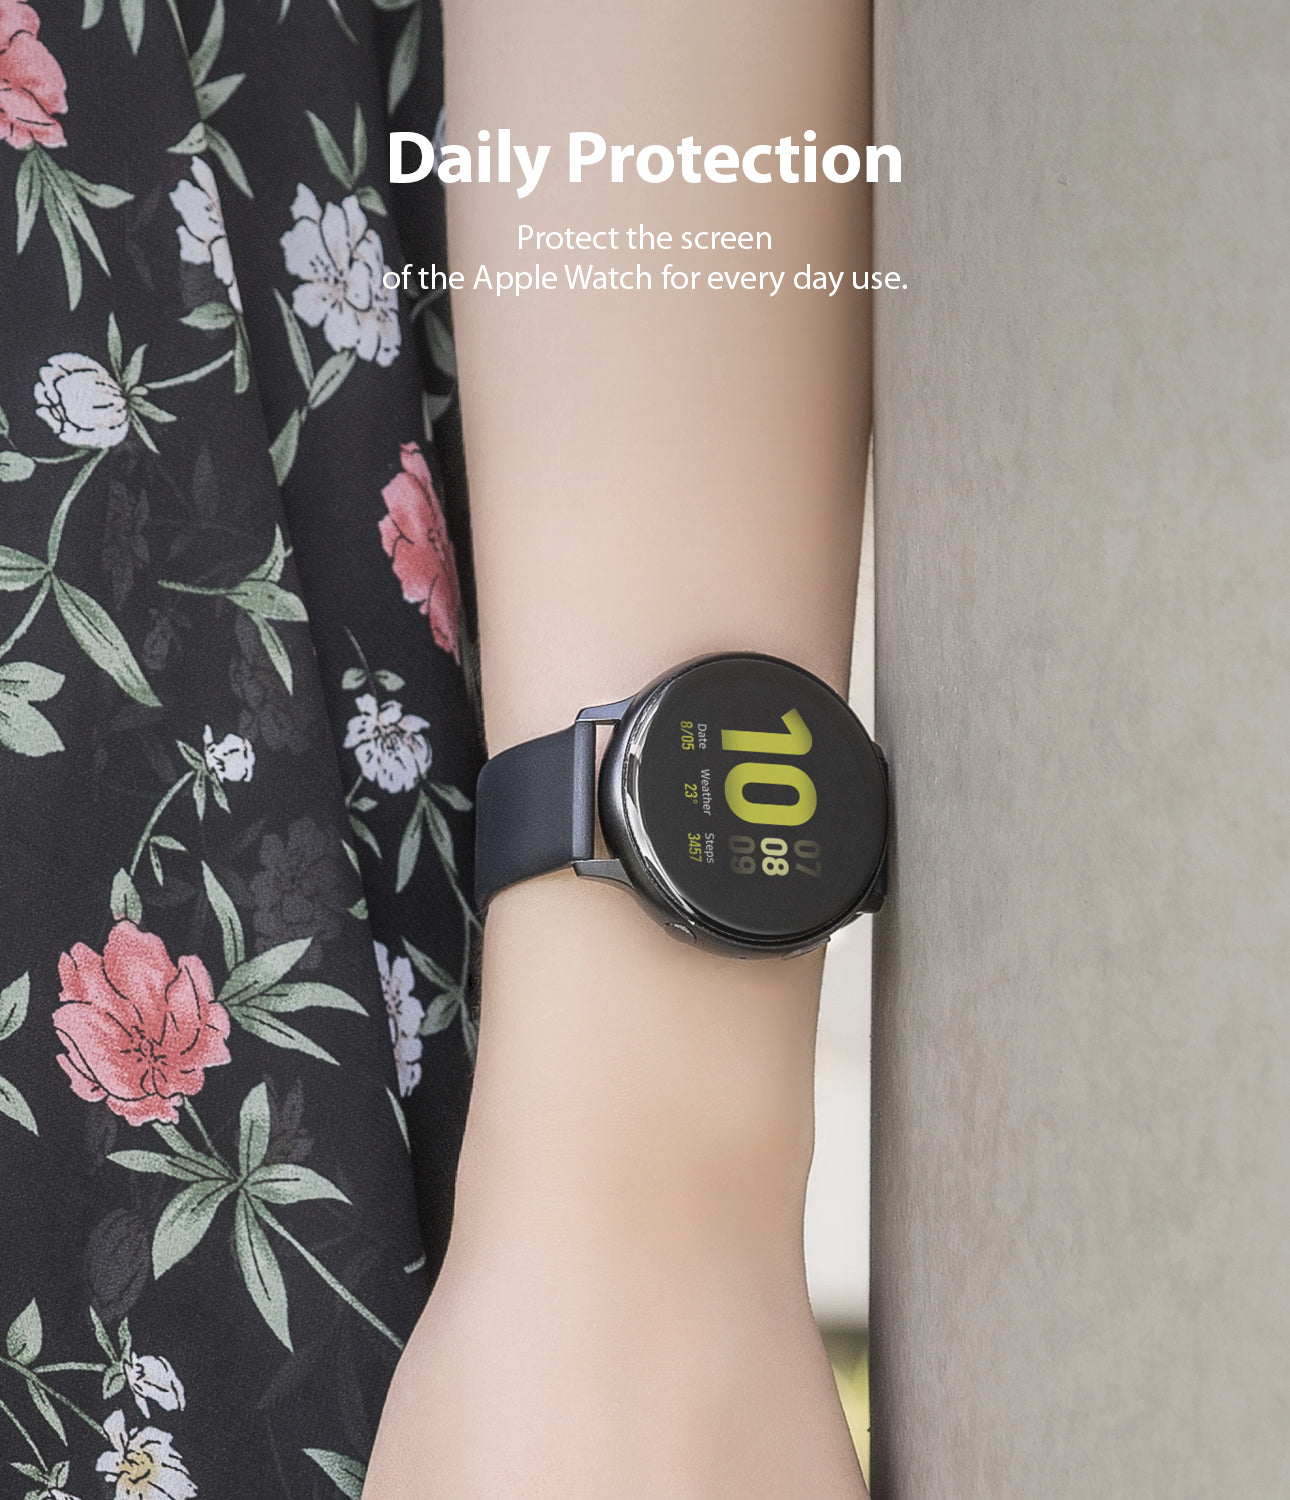 daily protection - protect the screen of the apple watch for everyday use